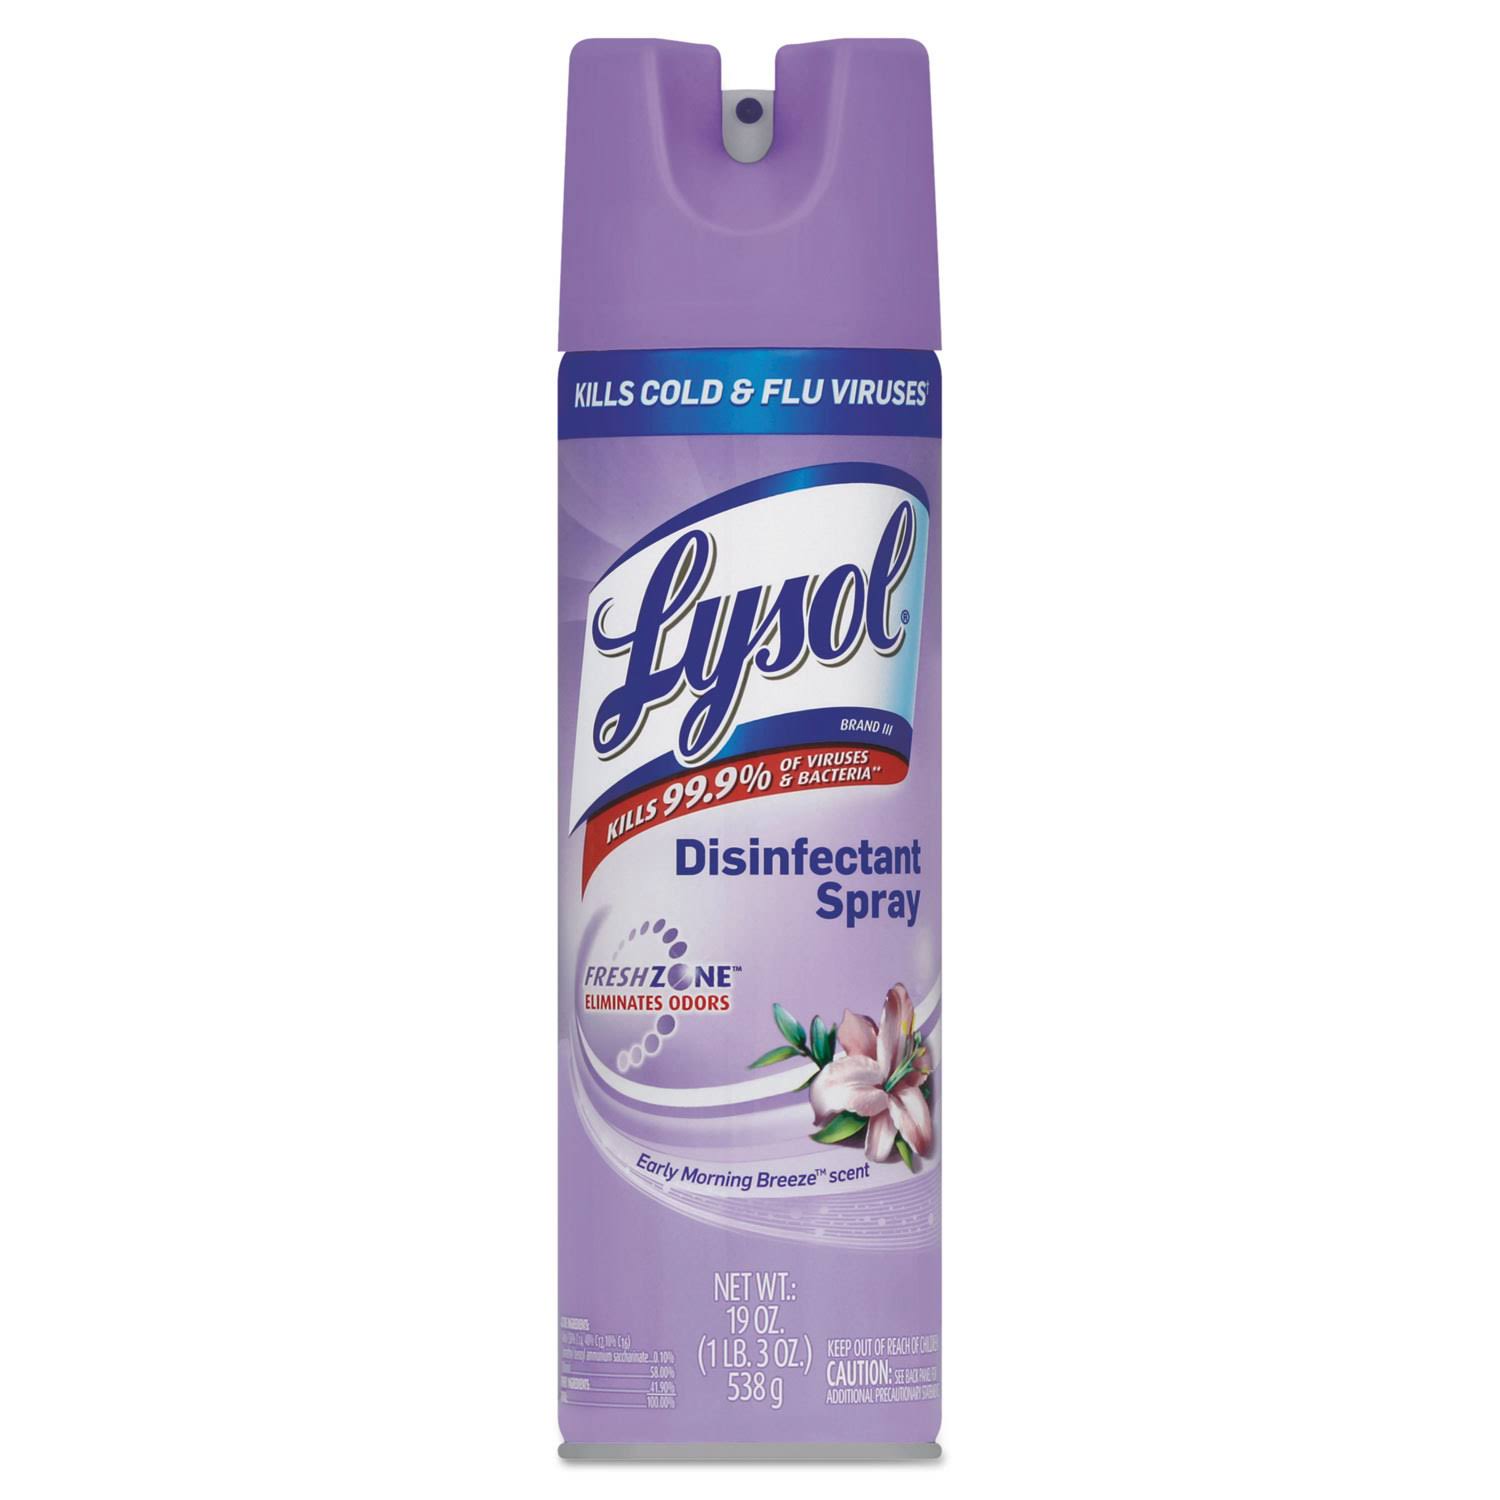 Lysol Disinfectant Spray - Early Morning Breeze,19oz